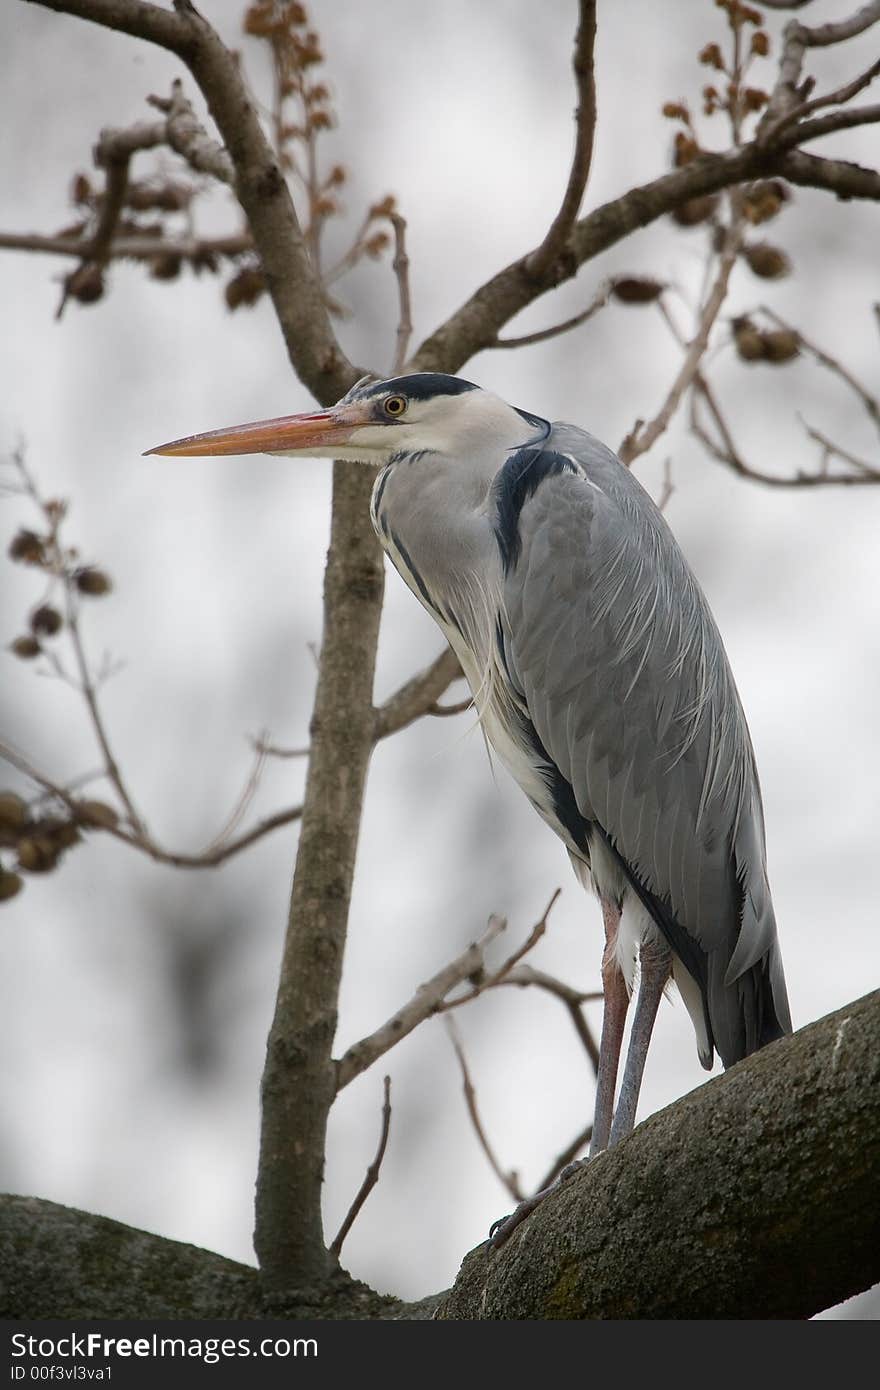 A grey heron on a tree, looking to the left. Grey sky as background.